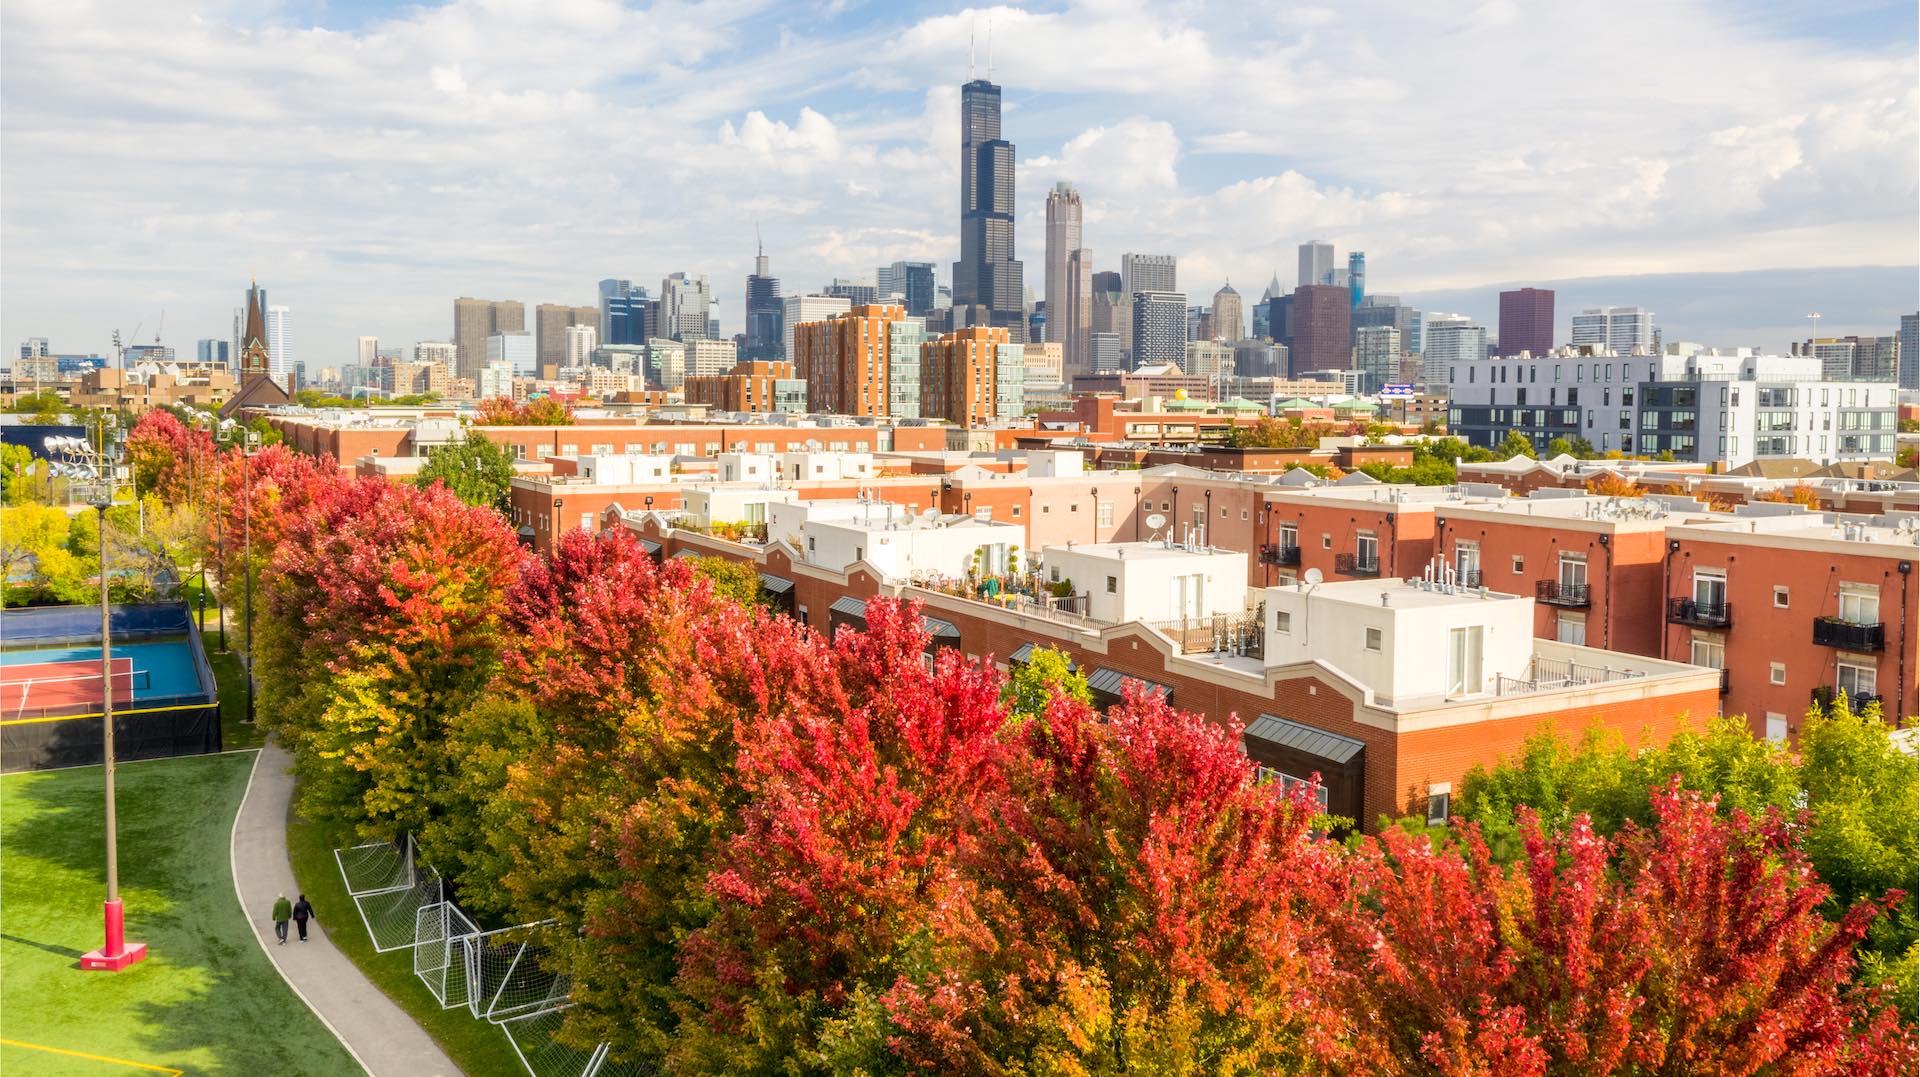 chicago skyline and trees in autumn